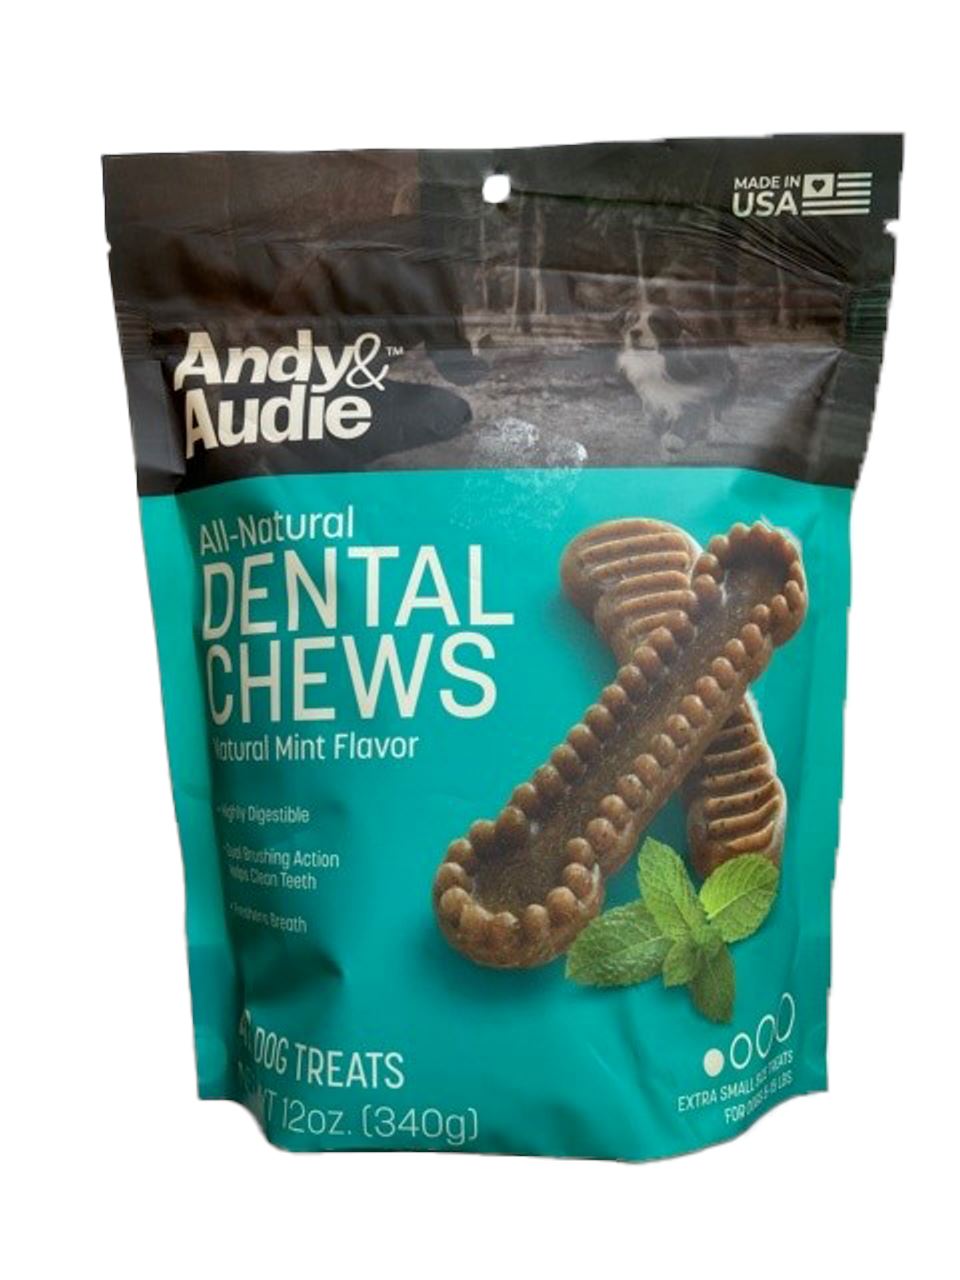 Andy & Audie All-Natural Dental Chews Natural Mint Flavor Large Treats - 8 Count, 12 oz  